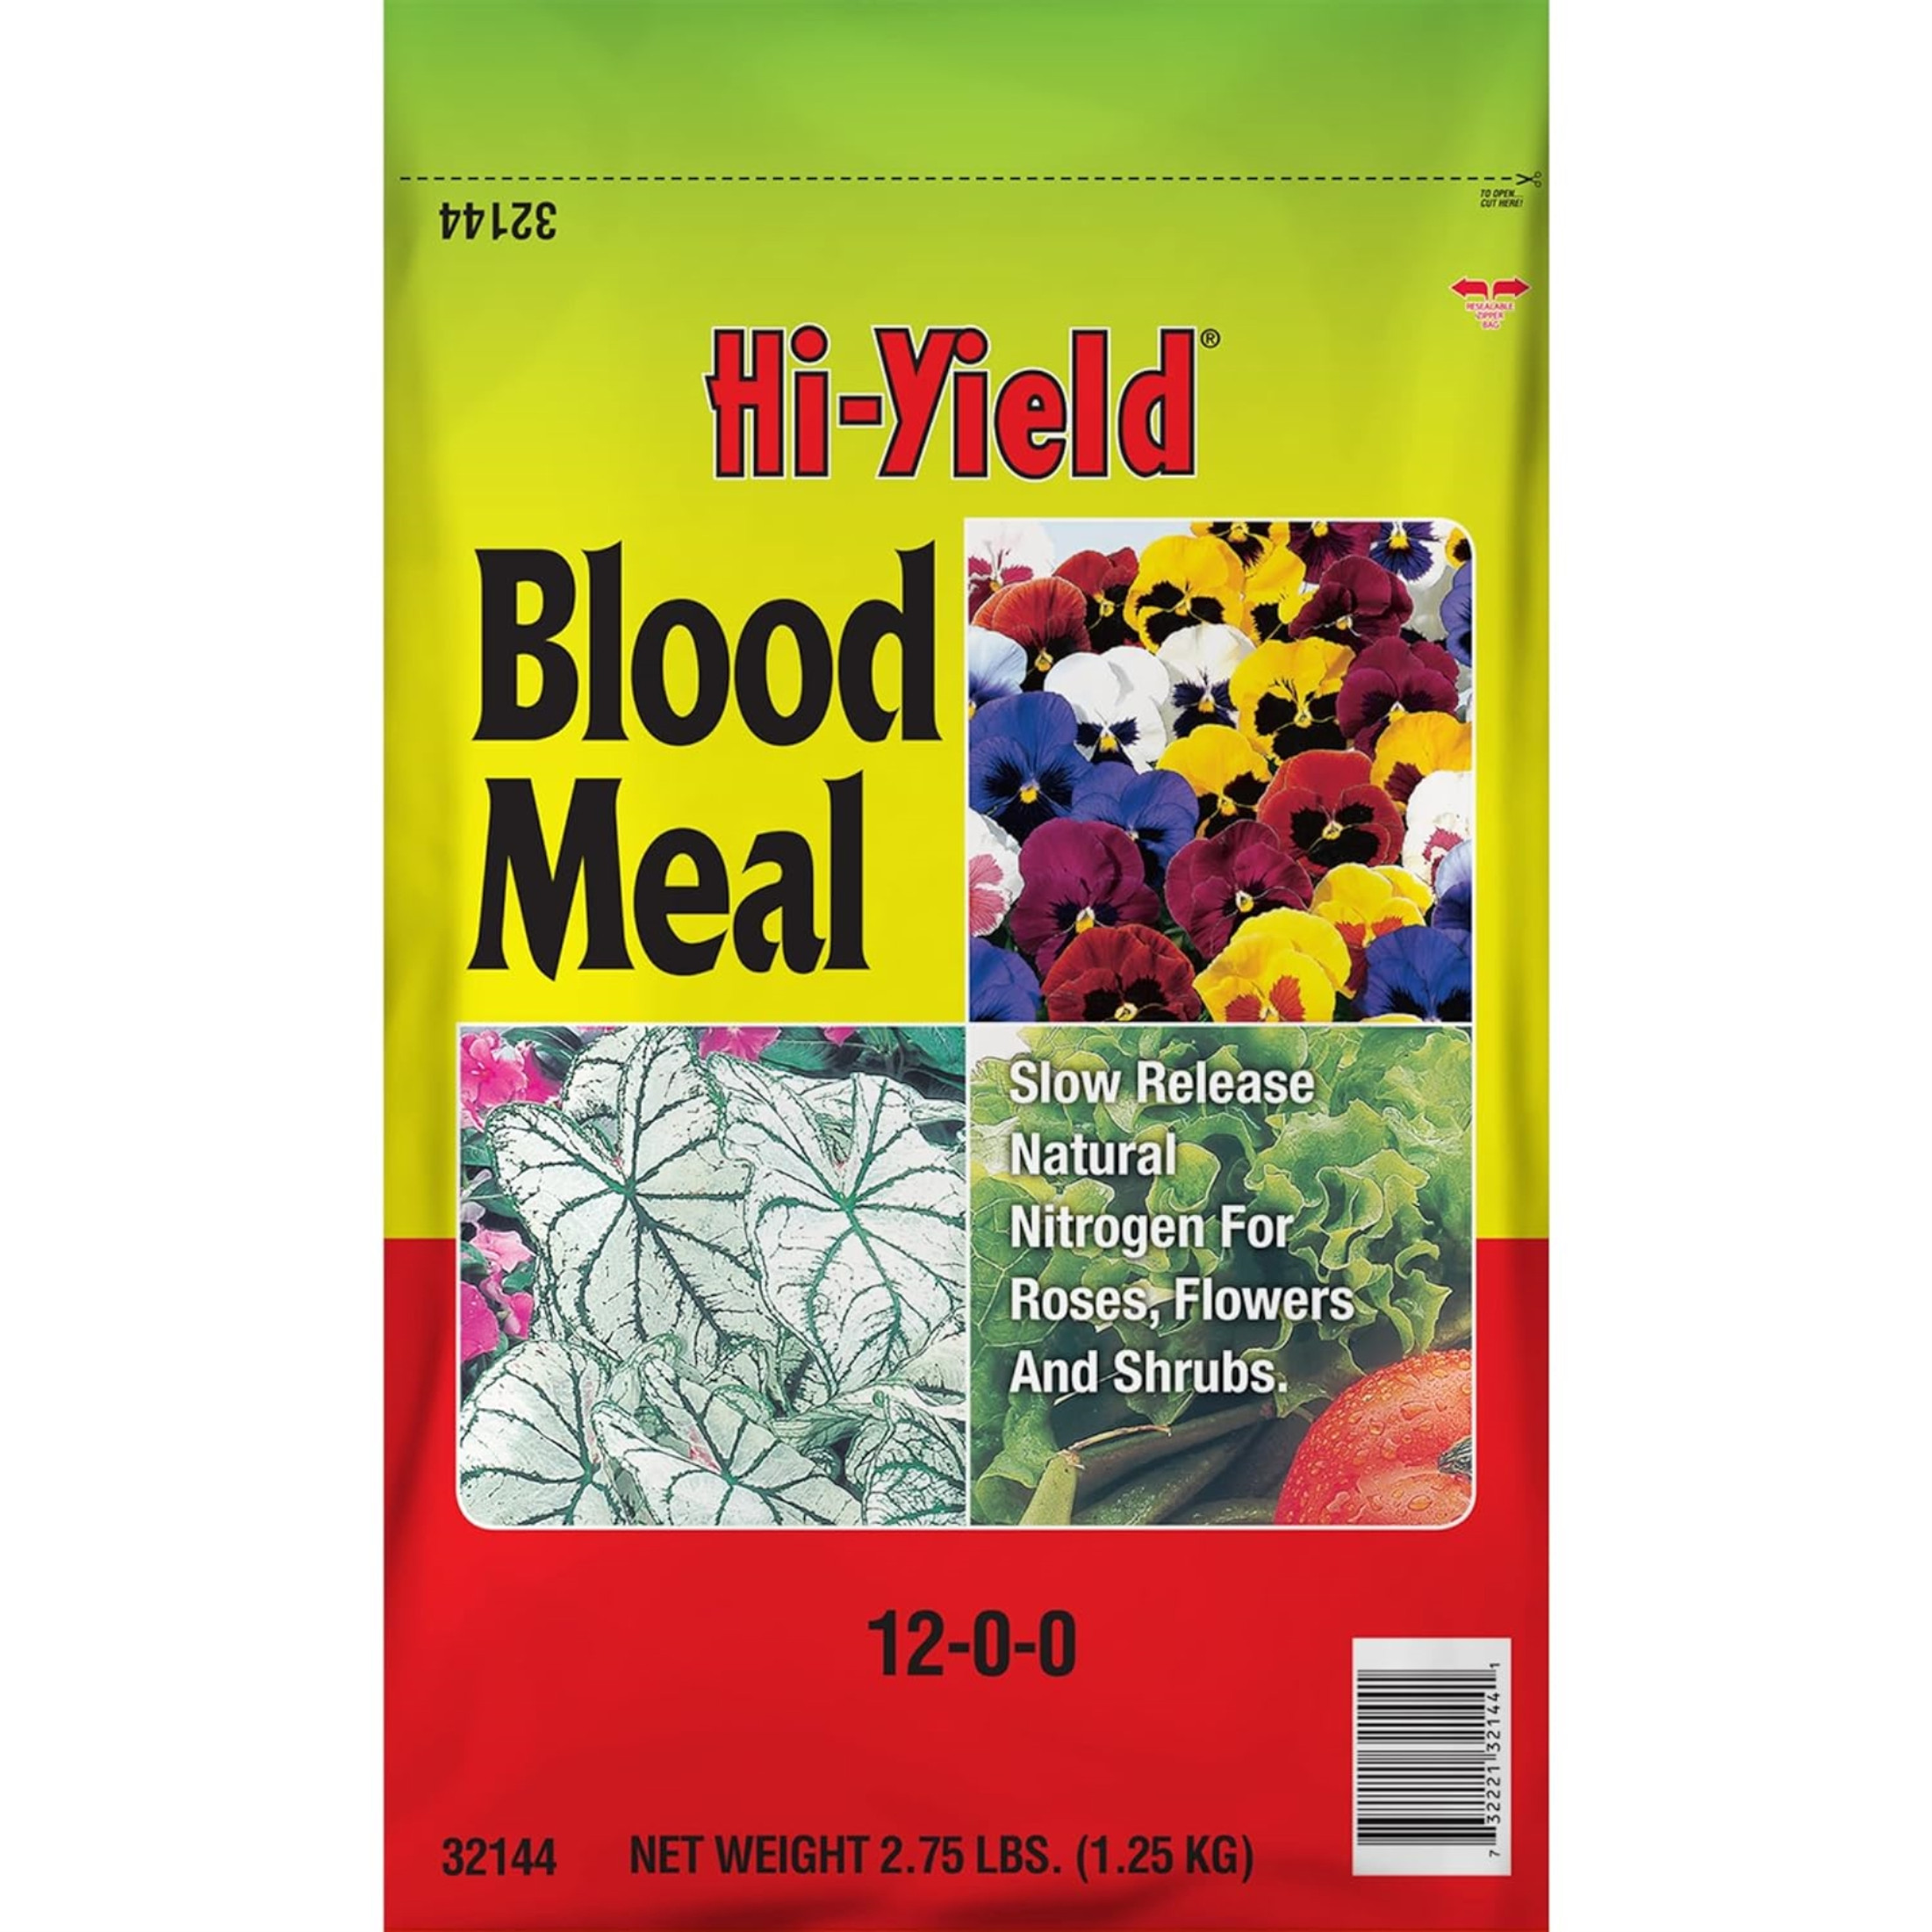 Voluntary Purchasing Group Fertilome 32144 Blood Meal, 12-0-0, 2.75-Pound